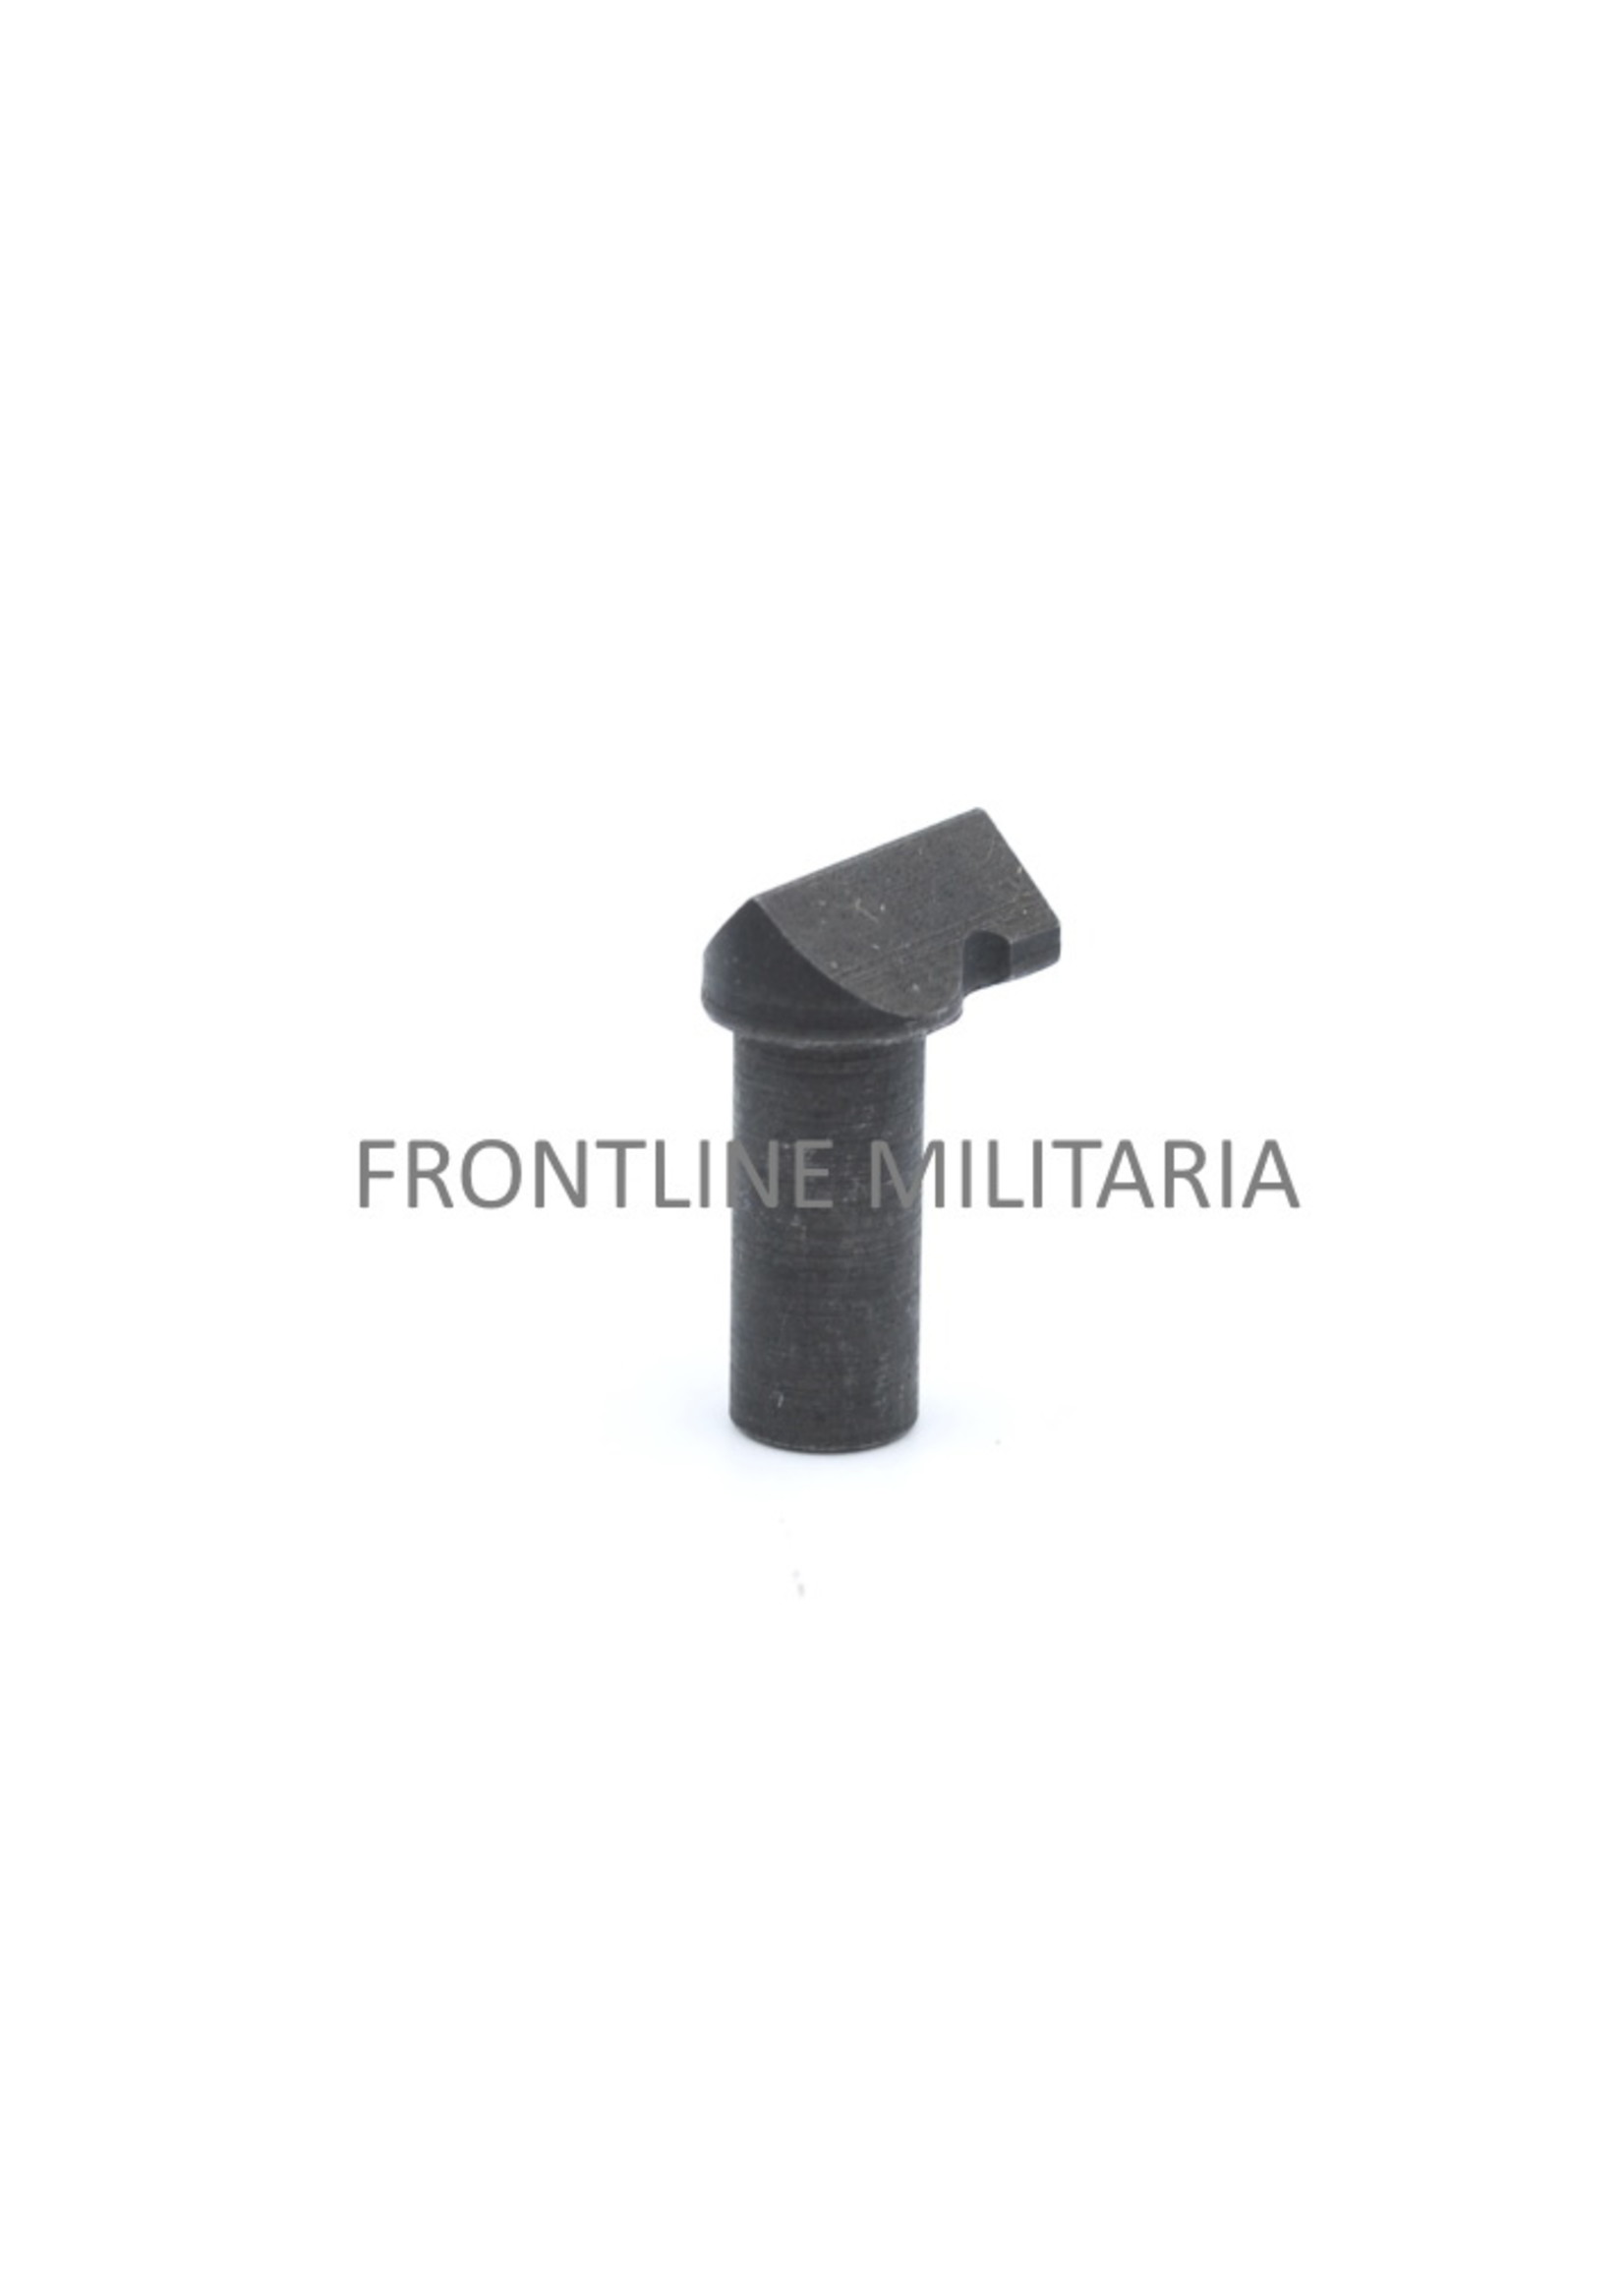 Safety plunger for the G43 and K43 Rifle